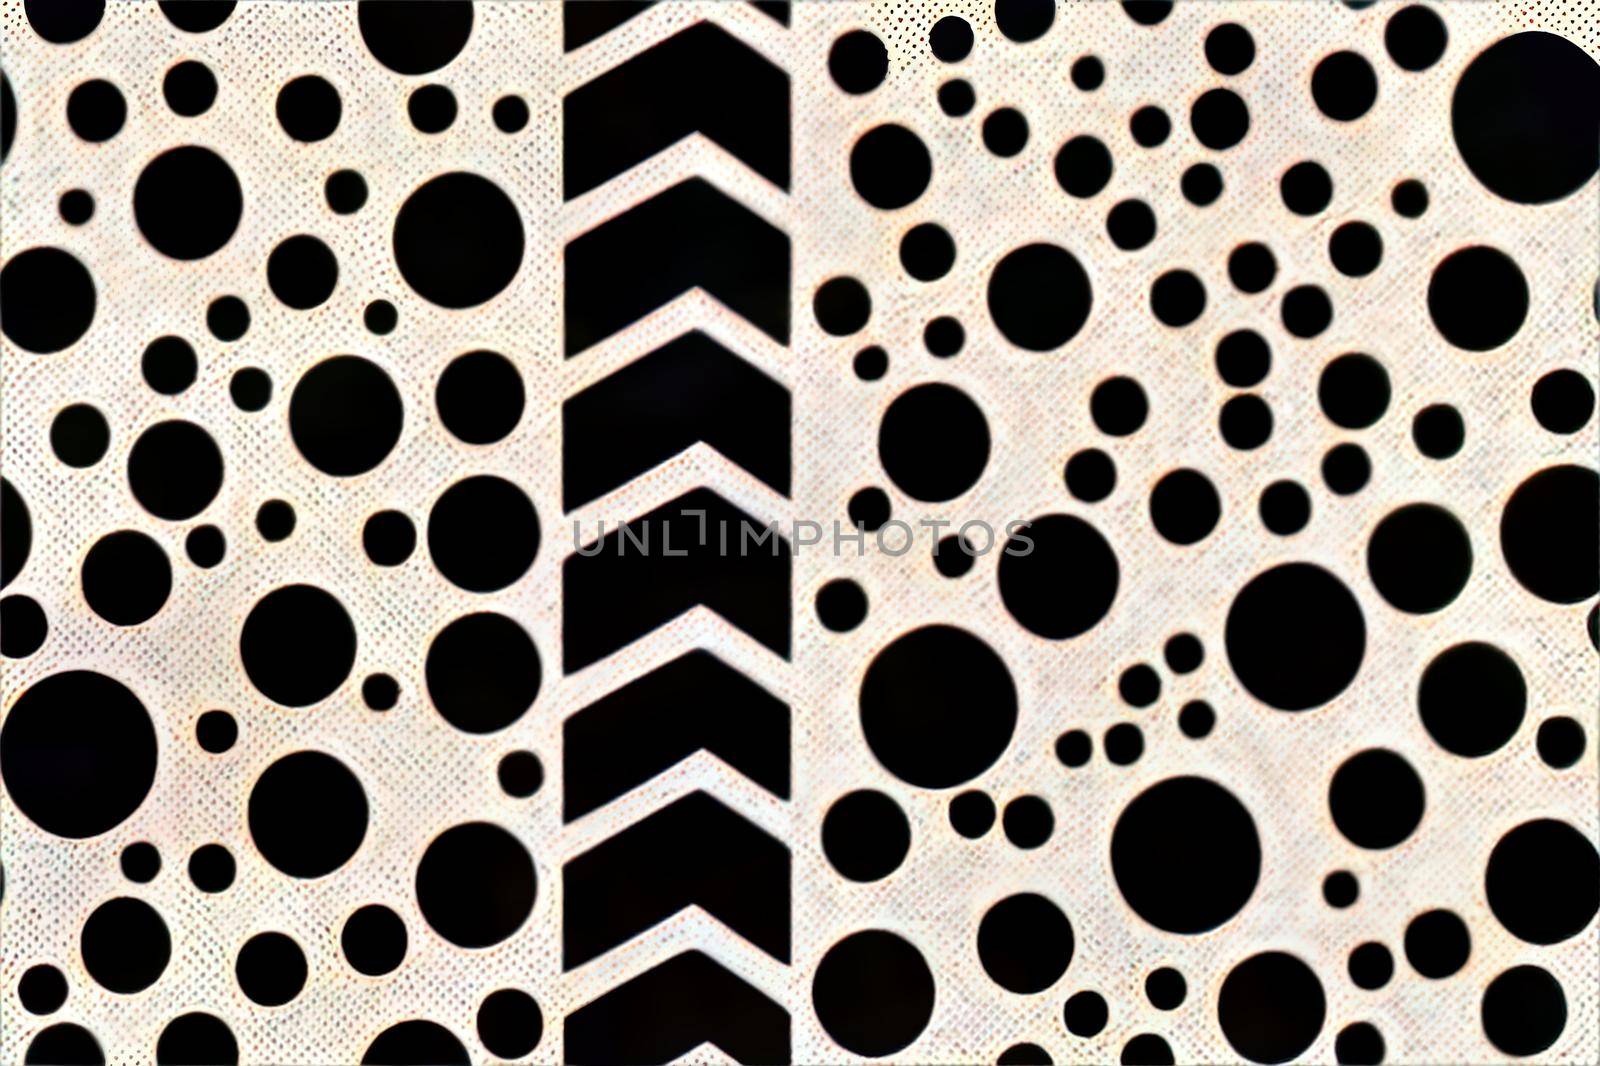 Abstract dots pattern print, for t-shirt, apparel, fabric or wrapping by 2ragon